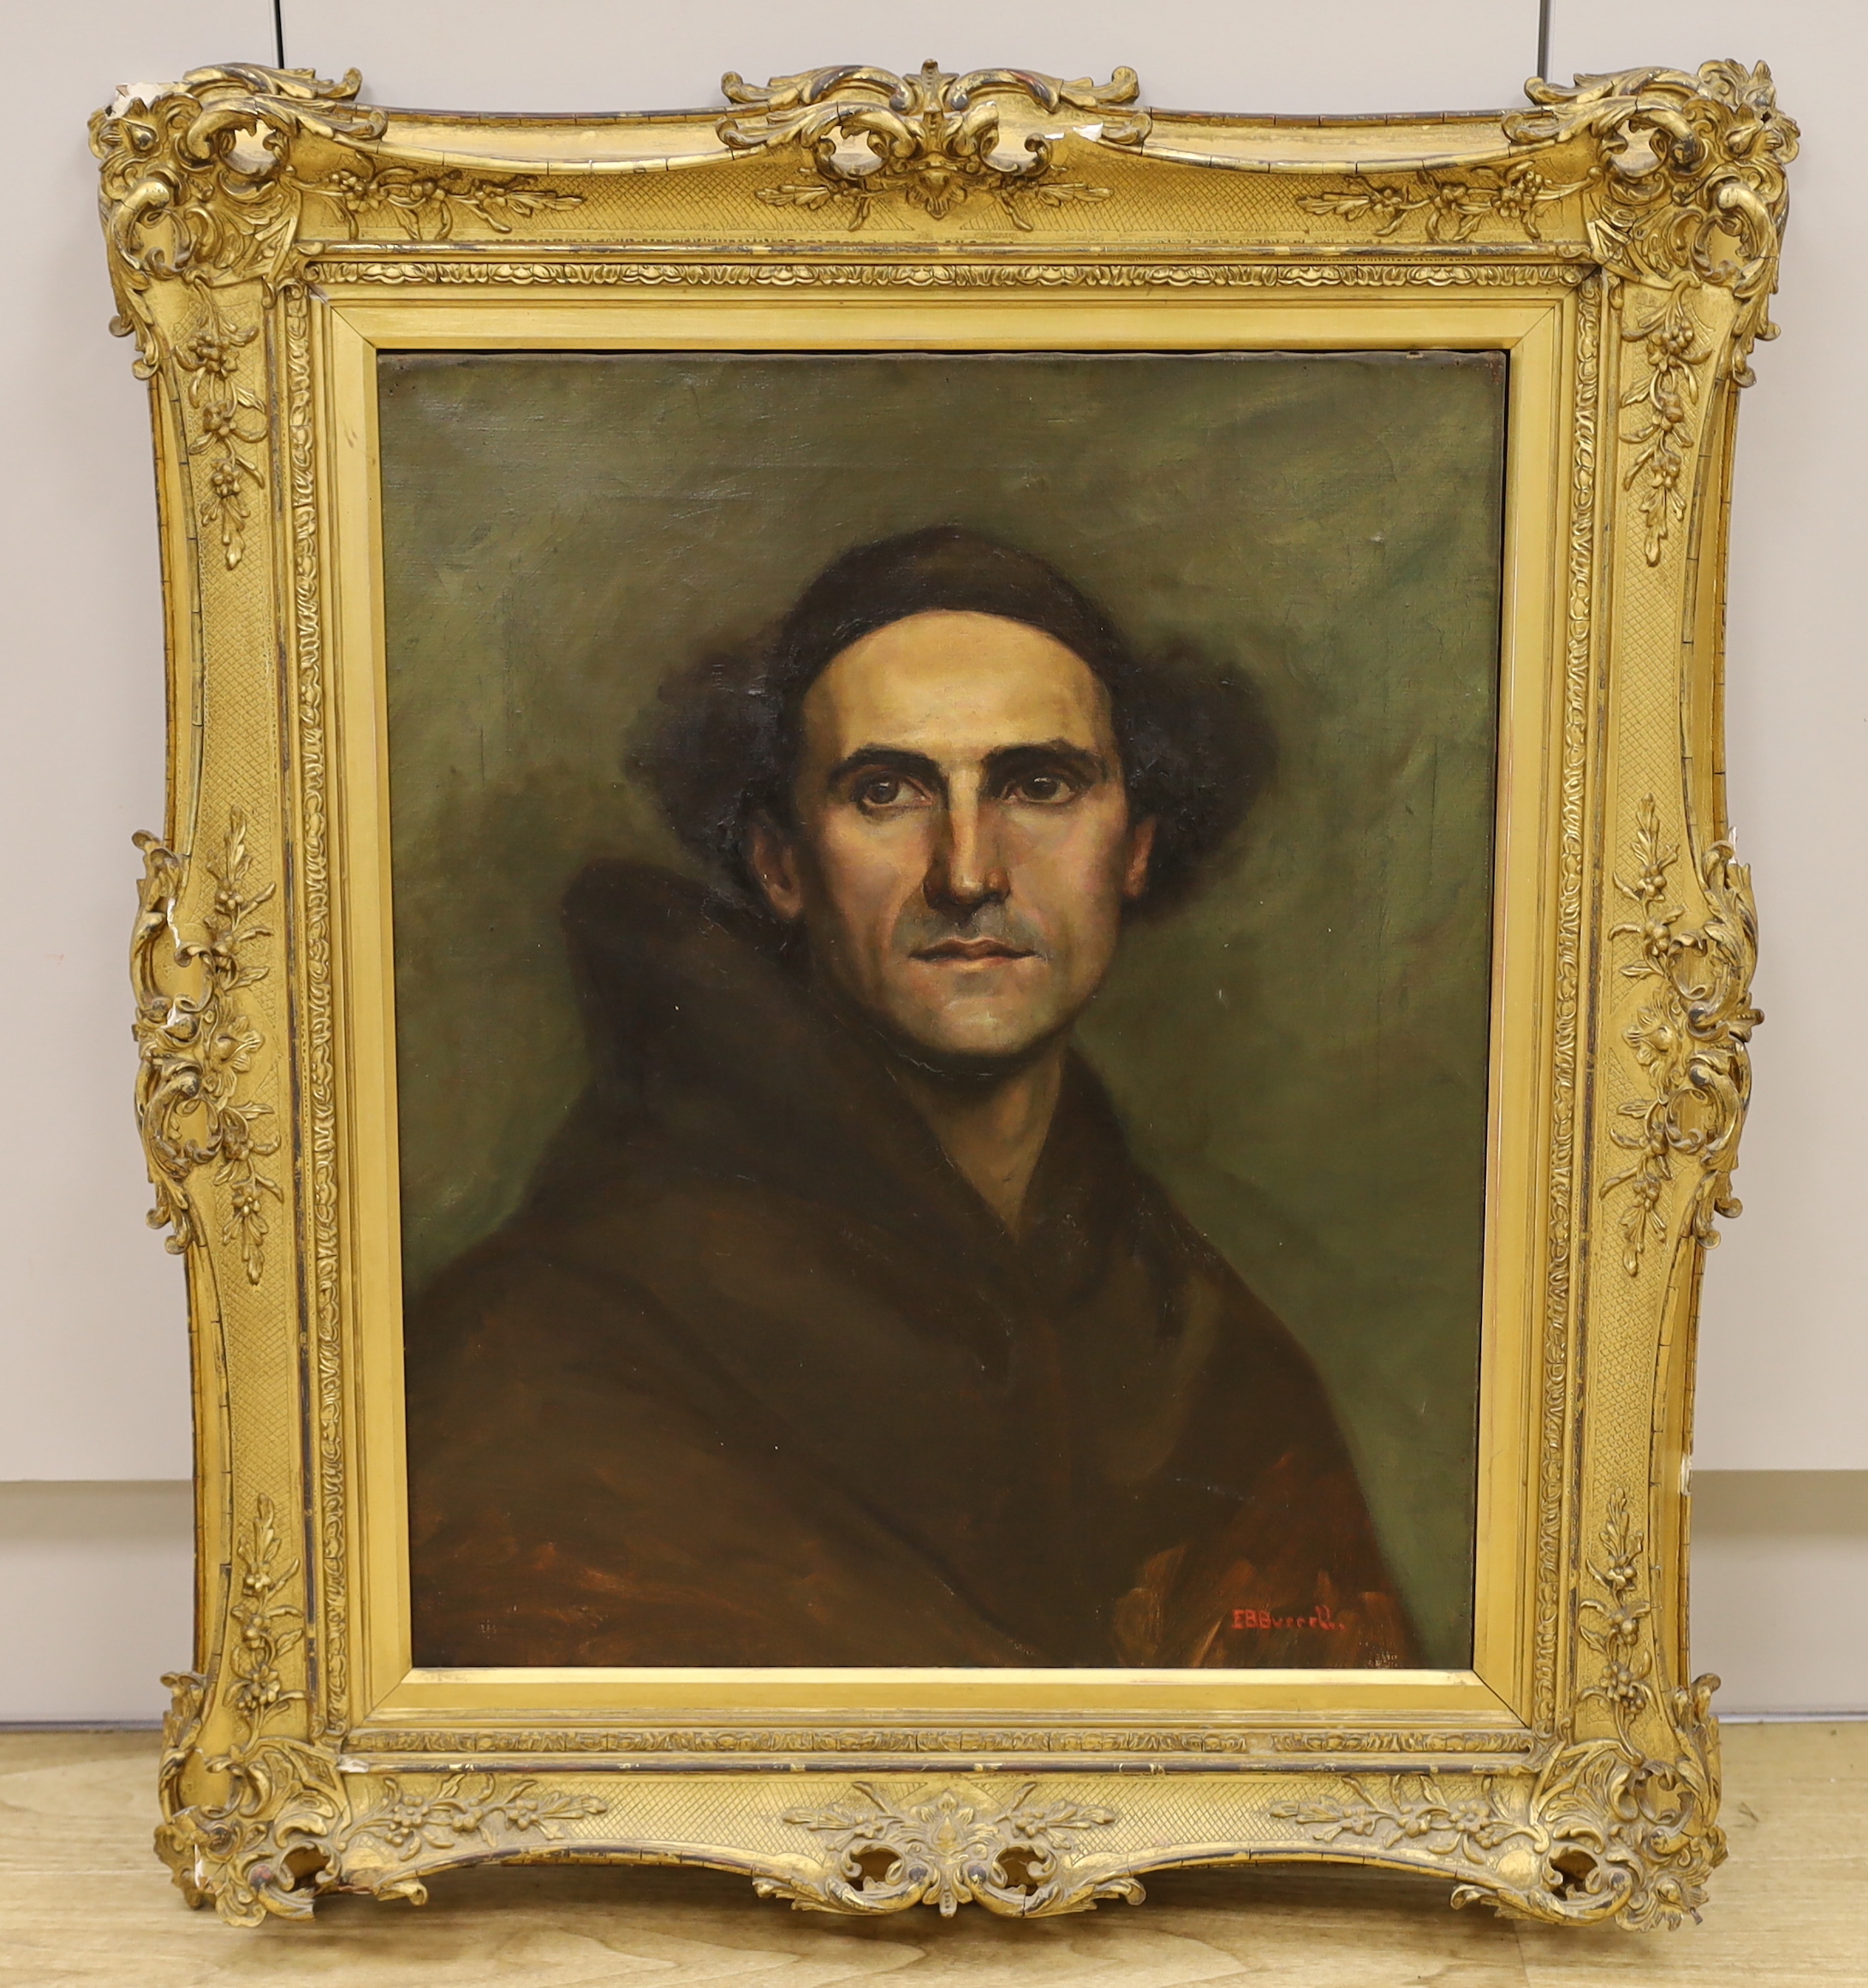 E.B. Burrell, oil on canvas, Portrait of a monk, housed in ornate gilt frame, 56 x 45cm - Image 2 of 5